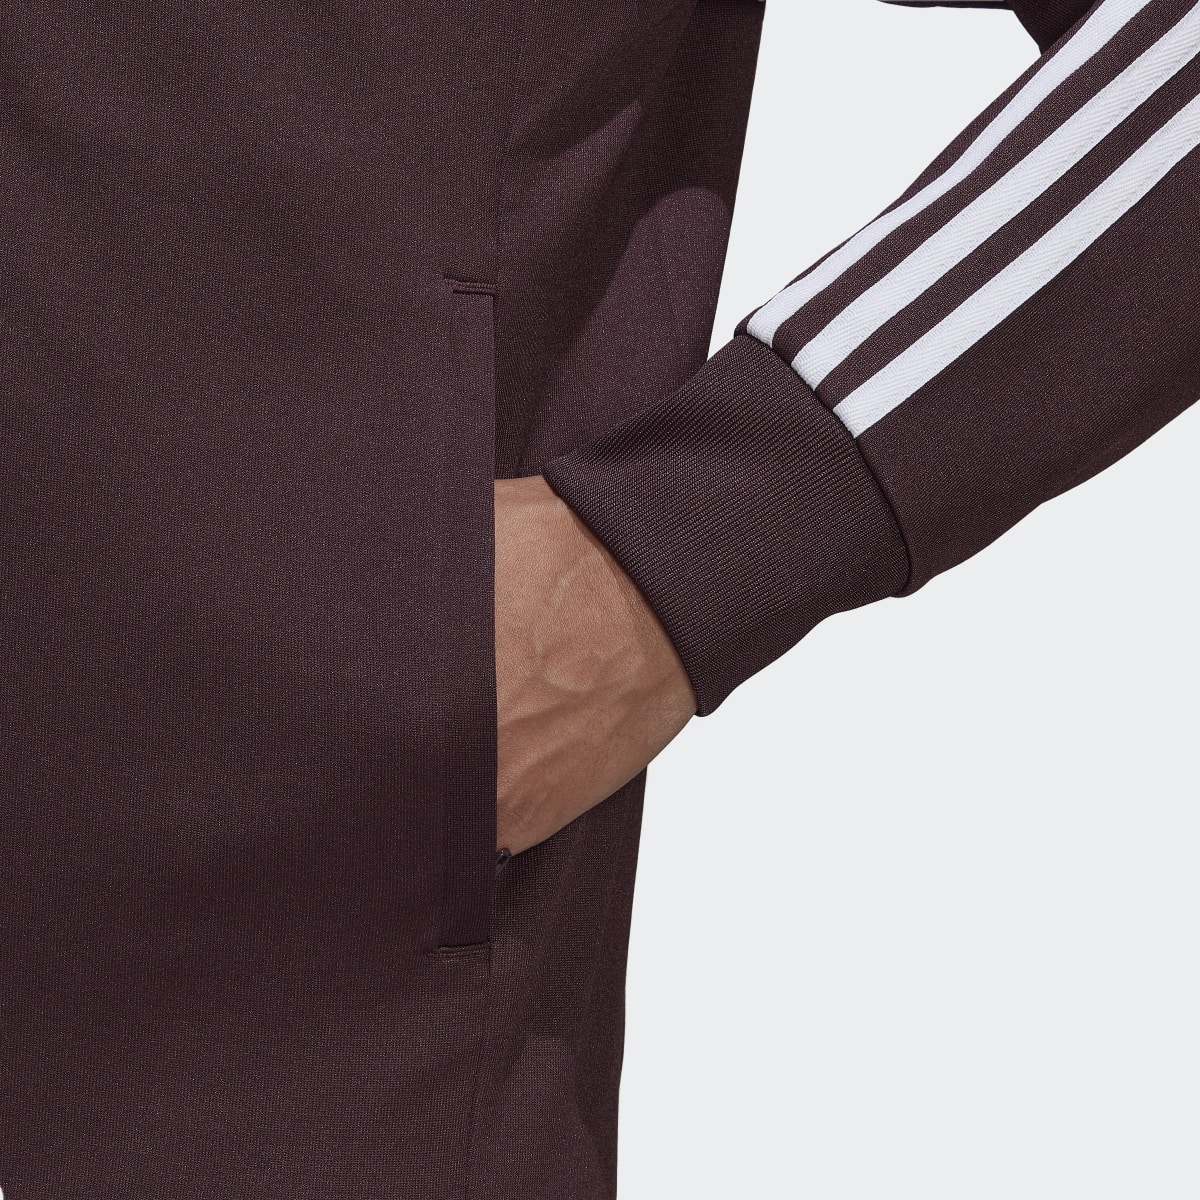 Adidas SST Track Top. 9